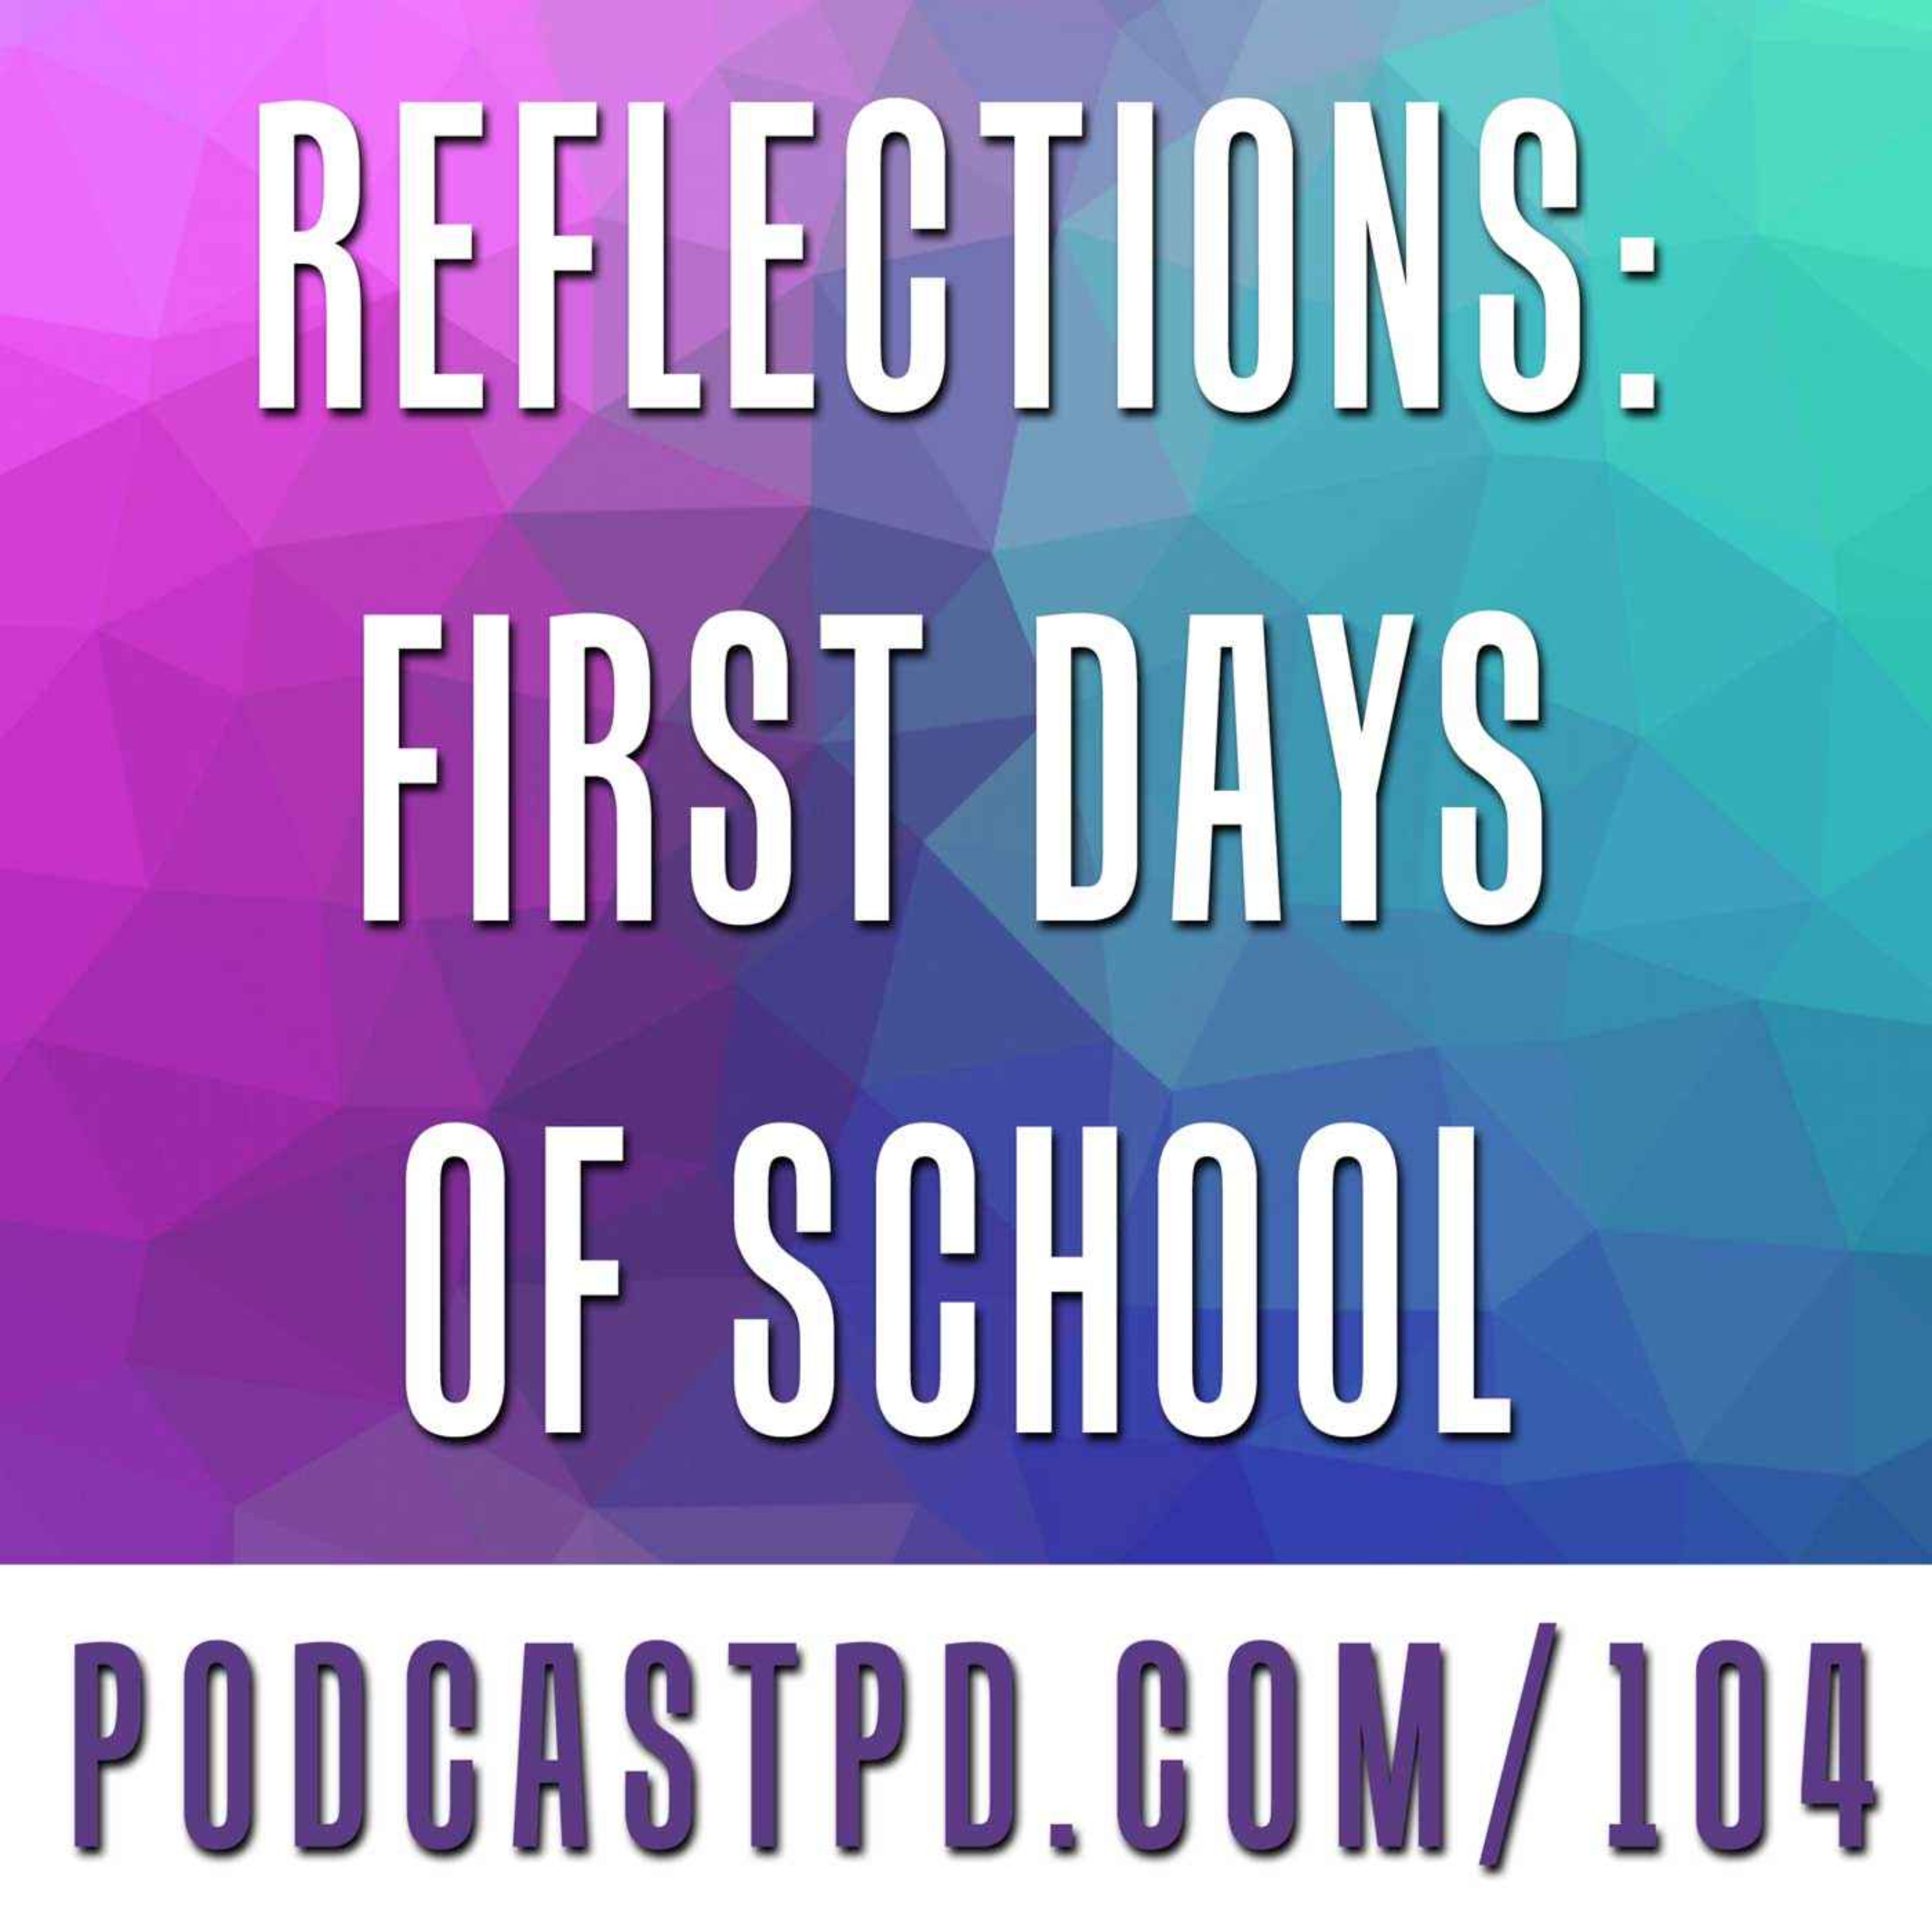 Reflections: First Days of School - PPD104 Image